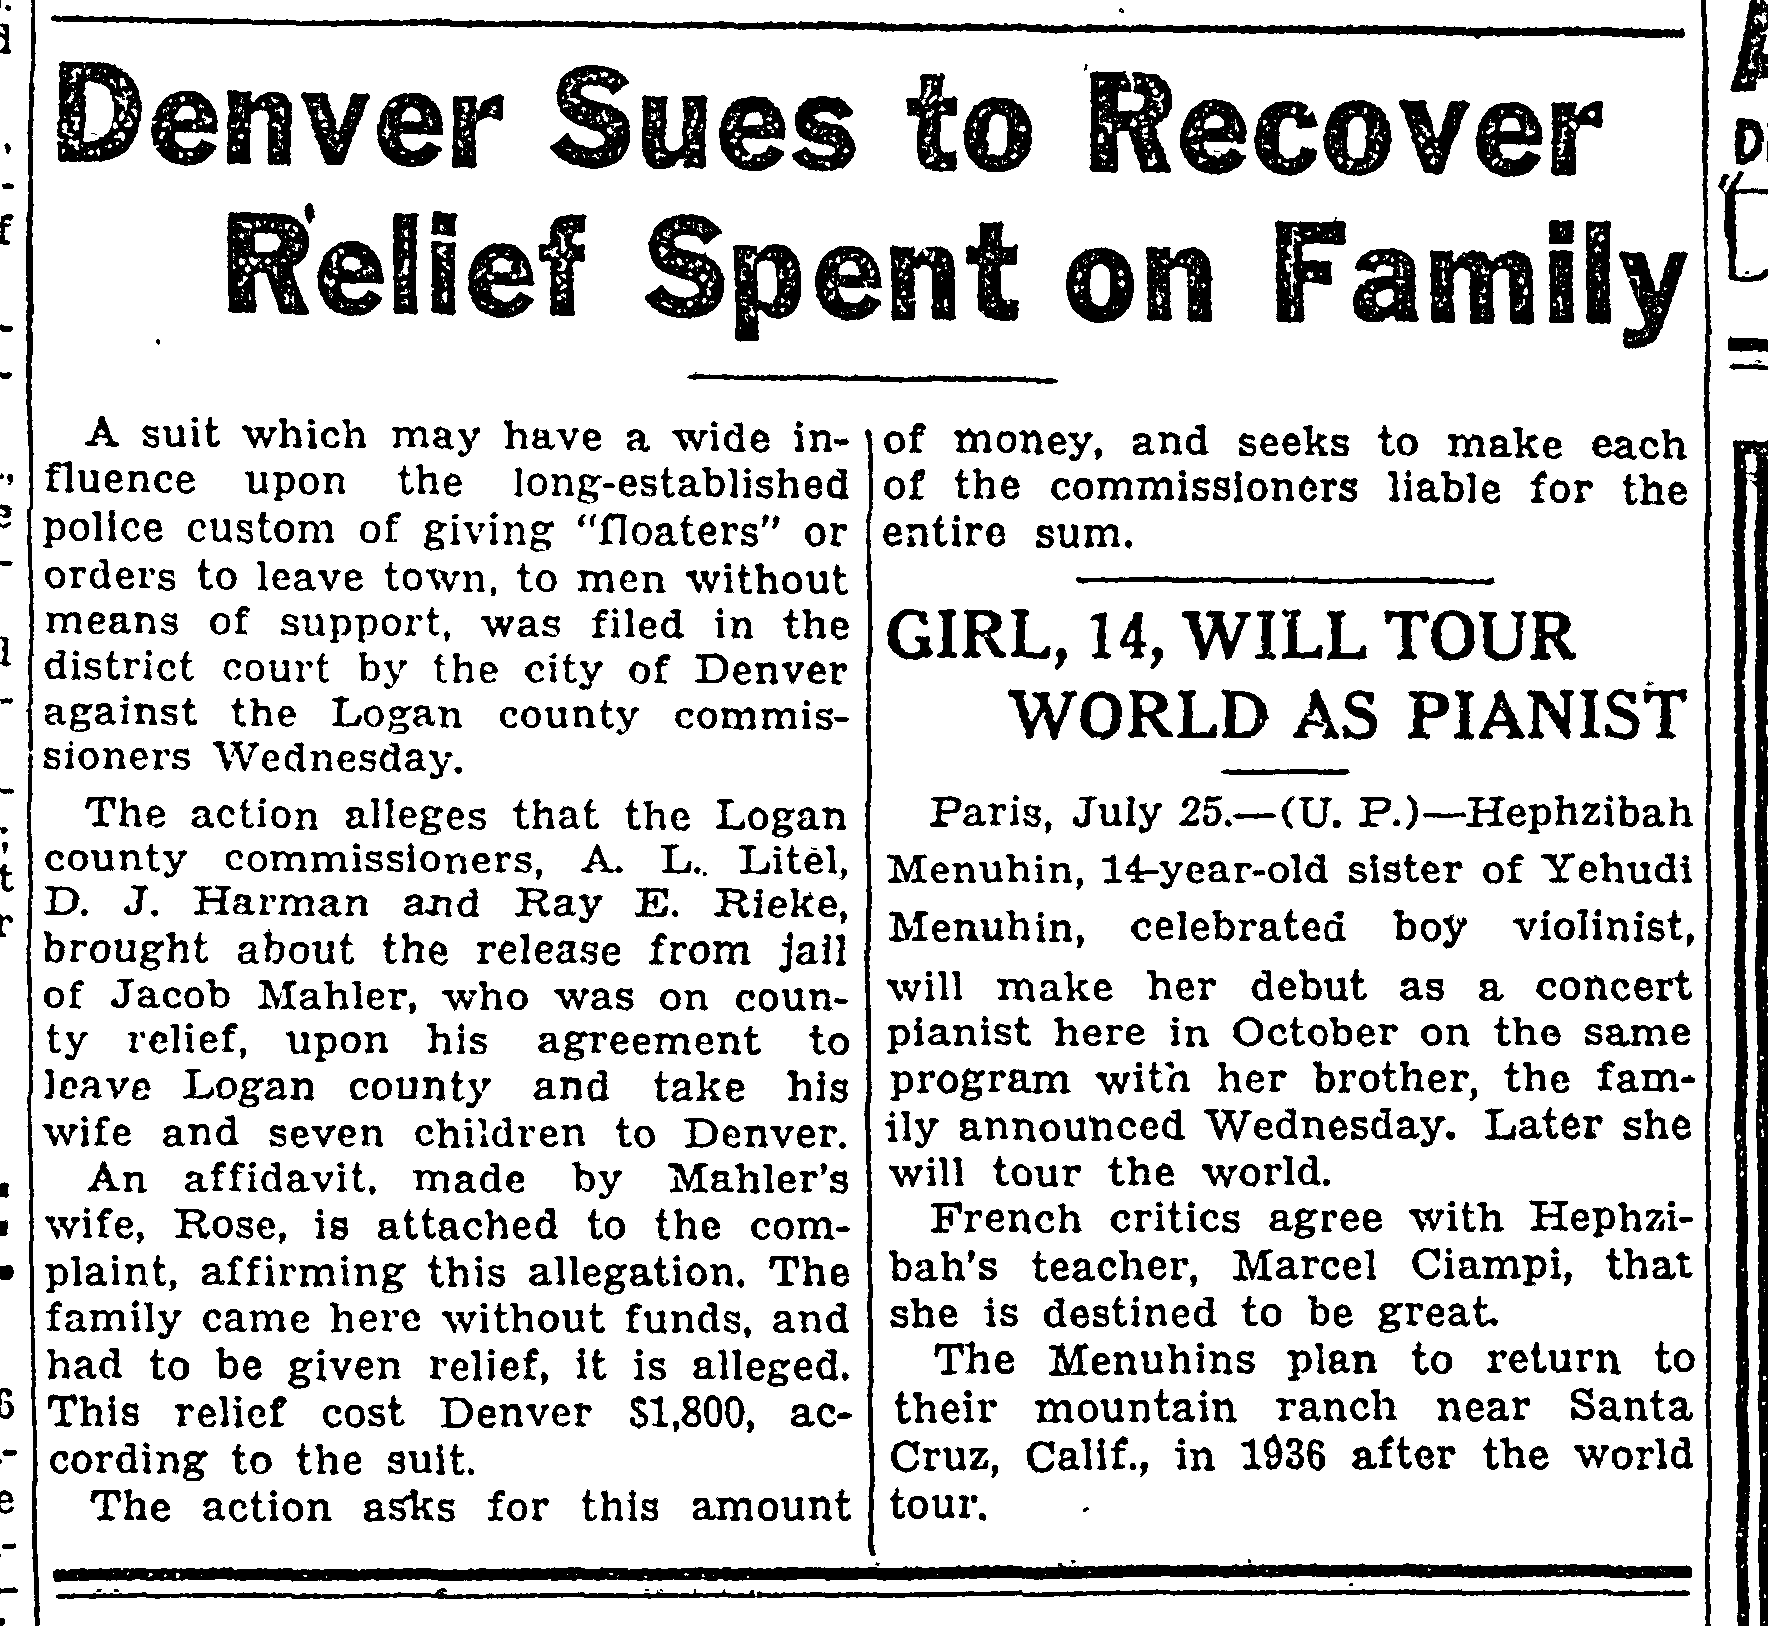 Article: Denver Sues to Recover Relief Spent on Family"